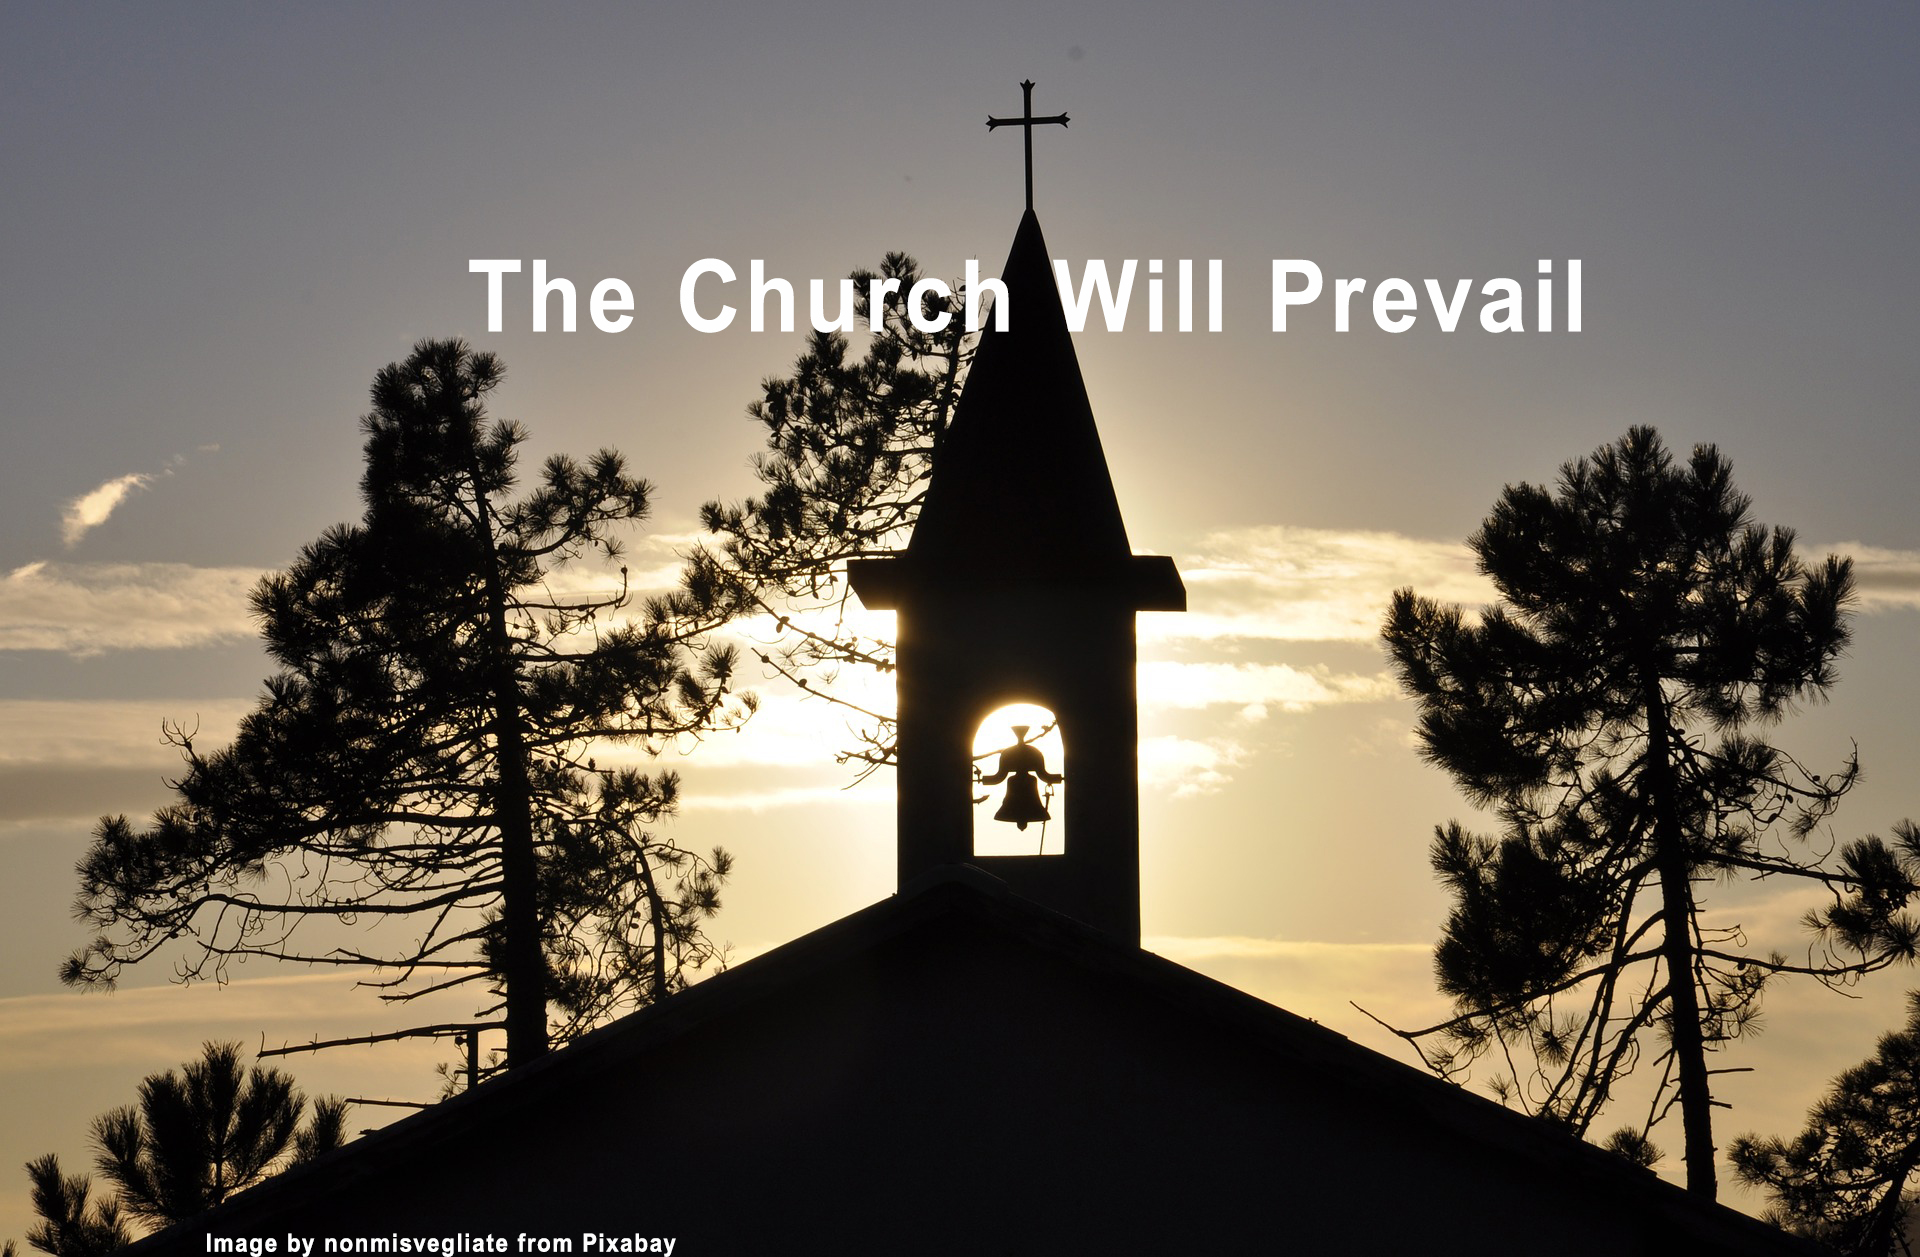 The Church Will Prevail